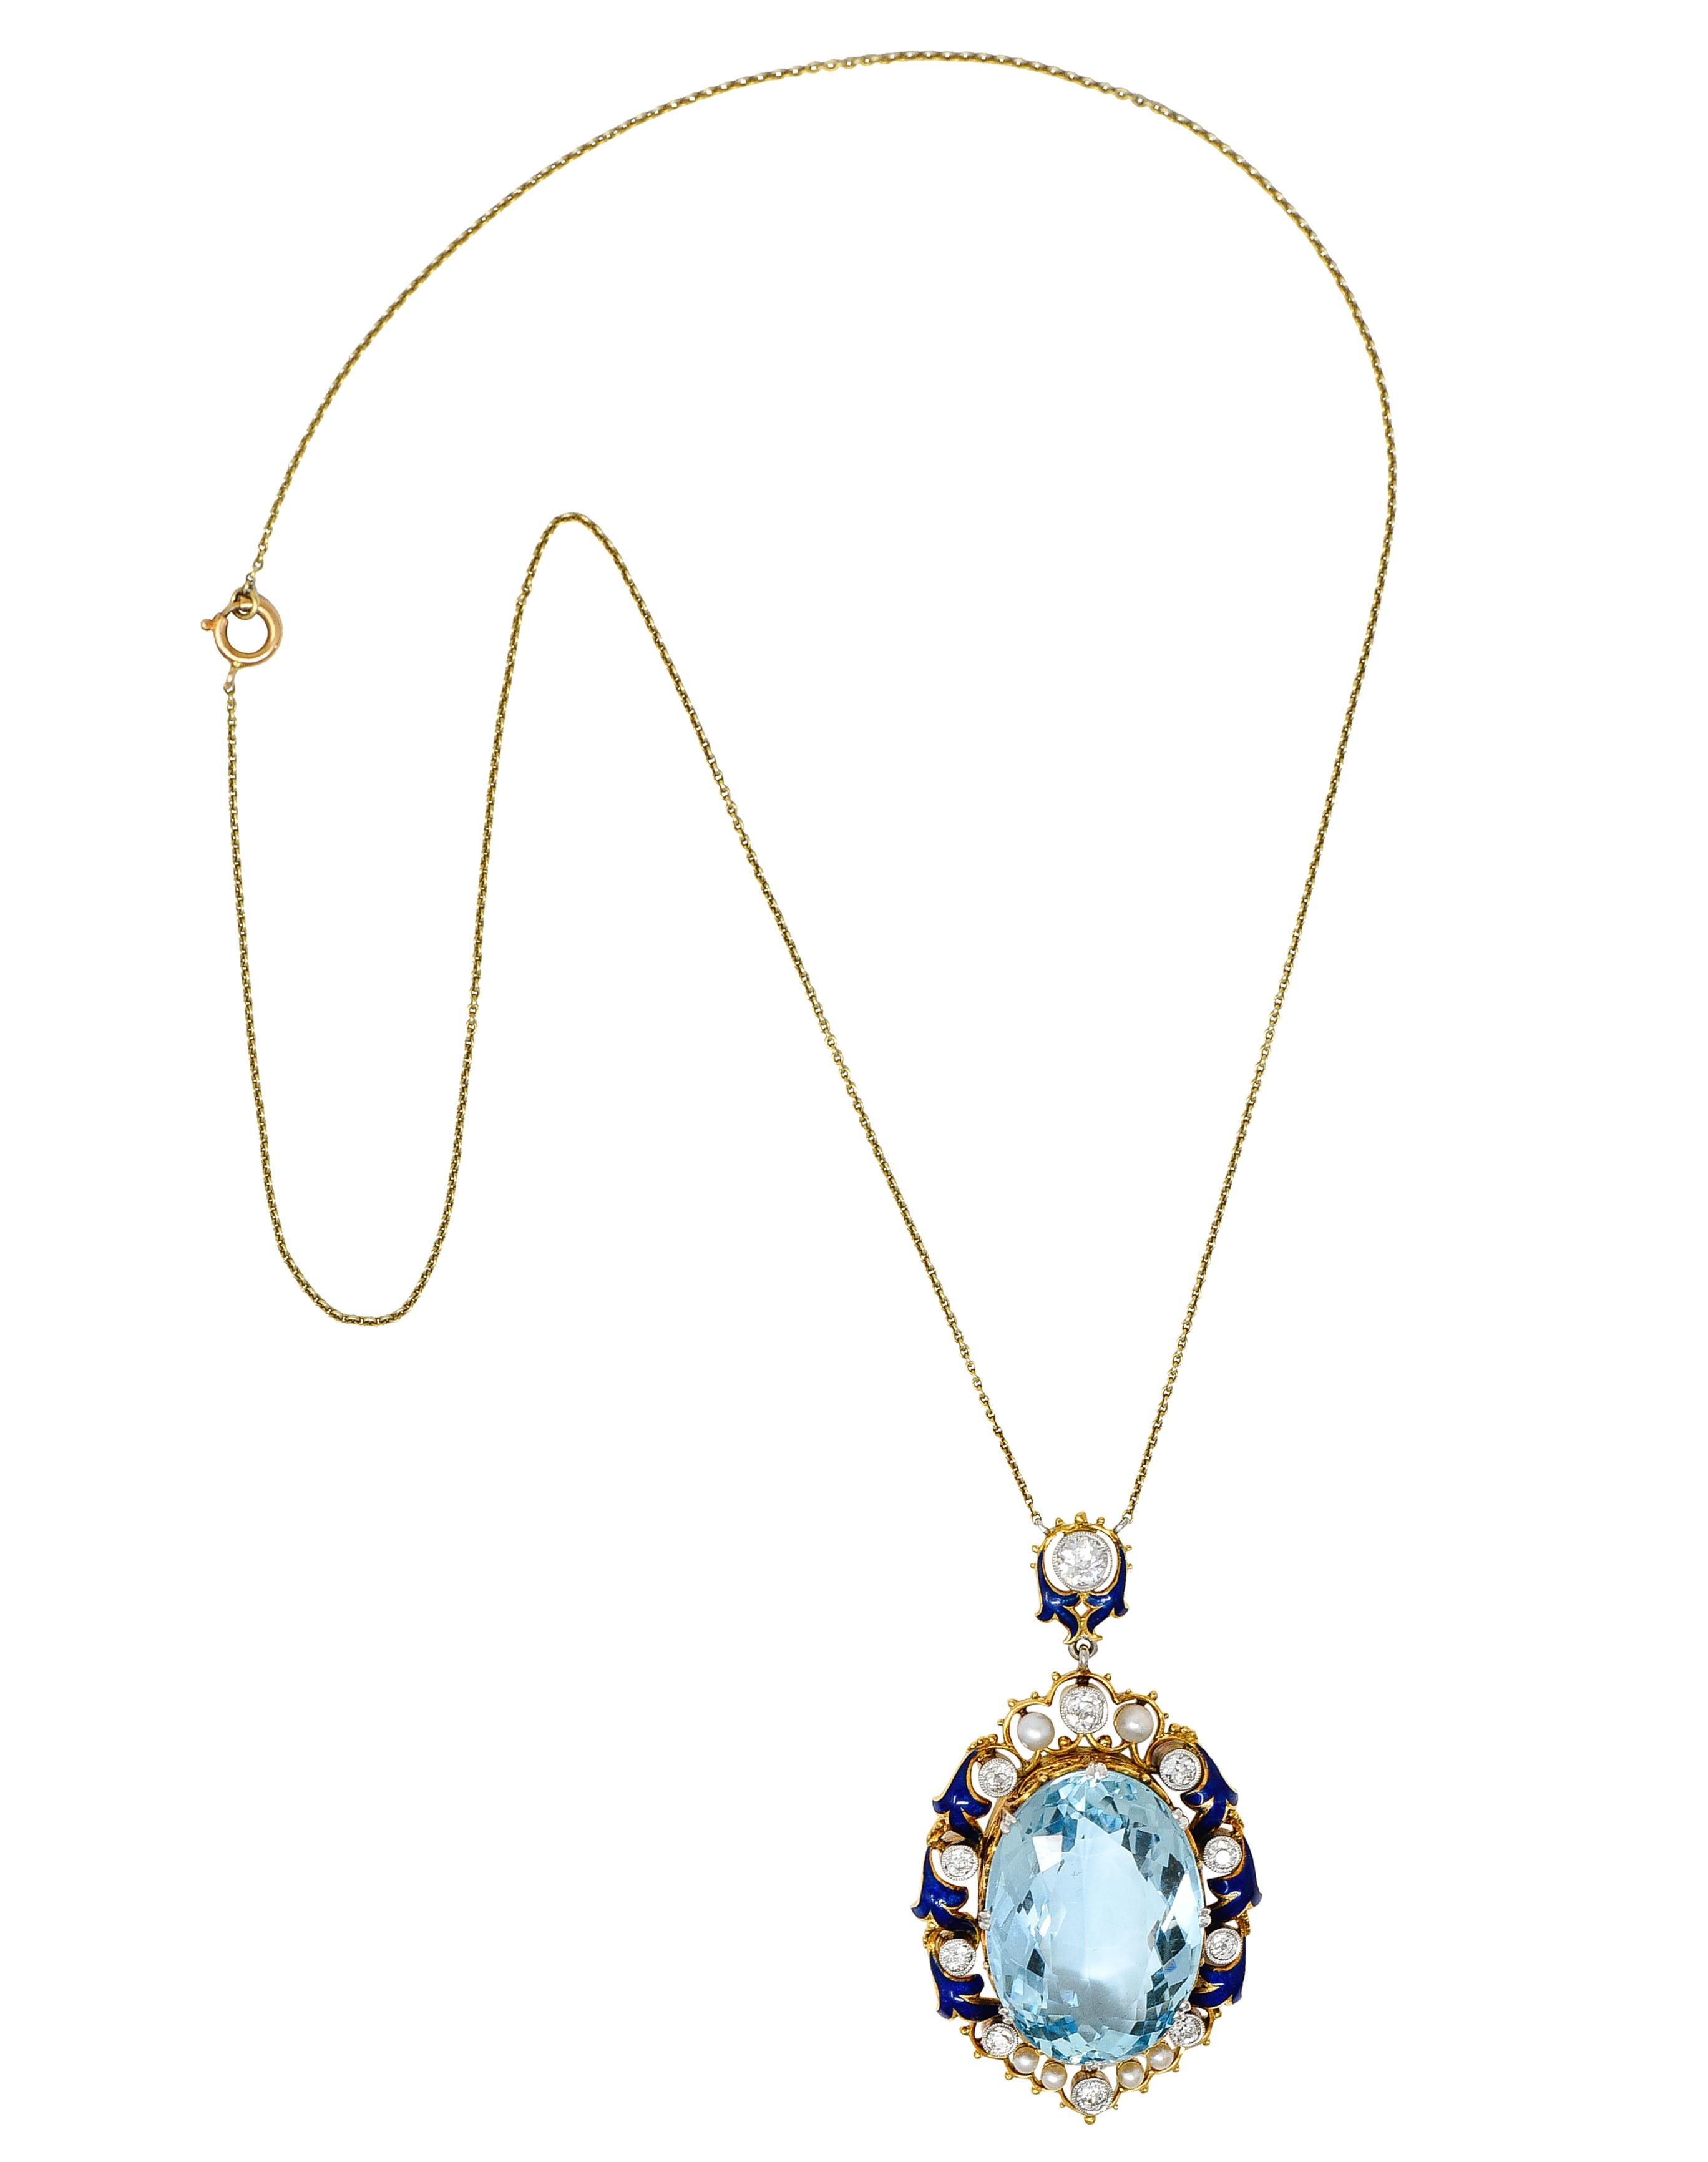 Designed as a cable chain necklace centering a pierced scrolling foliate gemstone station
Centering an oval cut aquamarine measuring 25.0 x 17.5 mm - transparent light blue in color weighing approximately 26.71 carats
Set with platinum-topped split